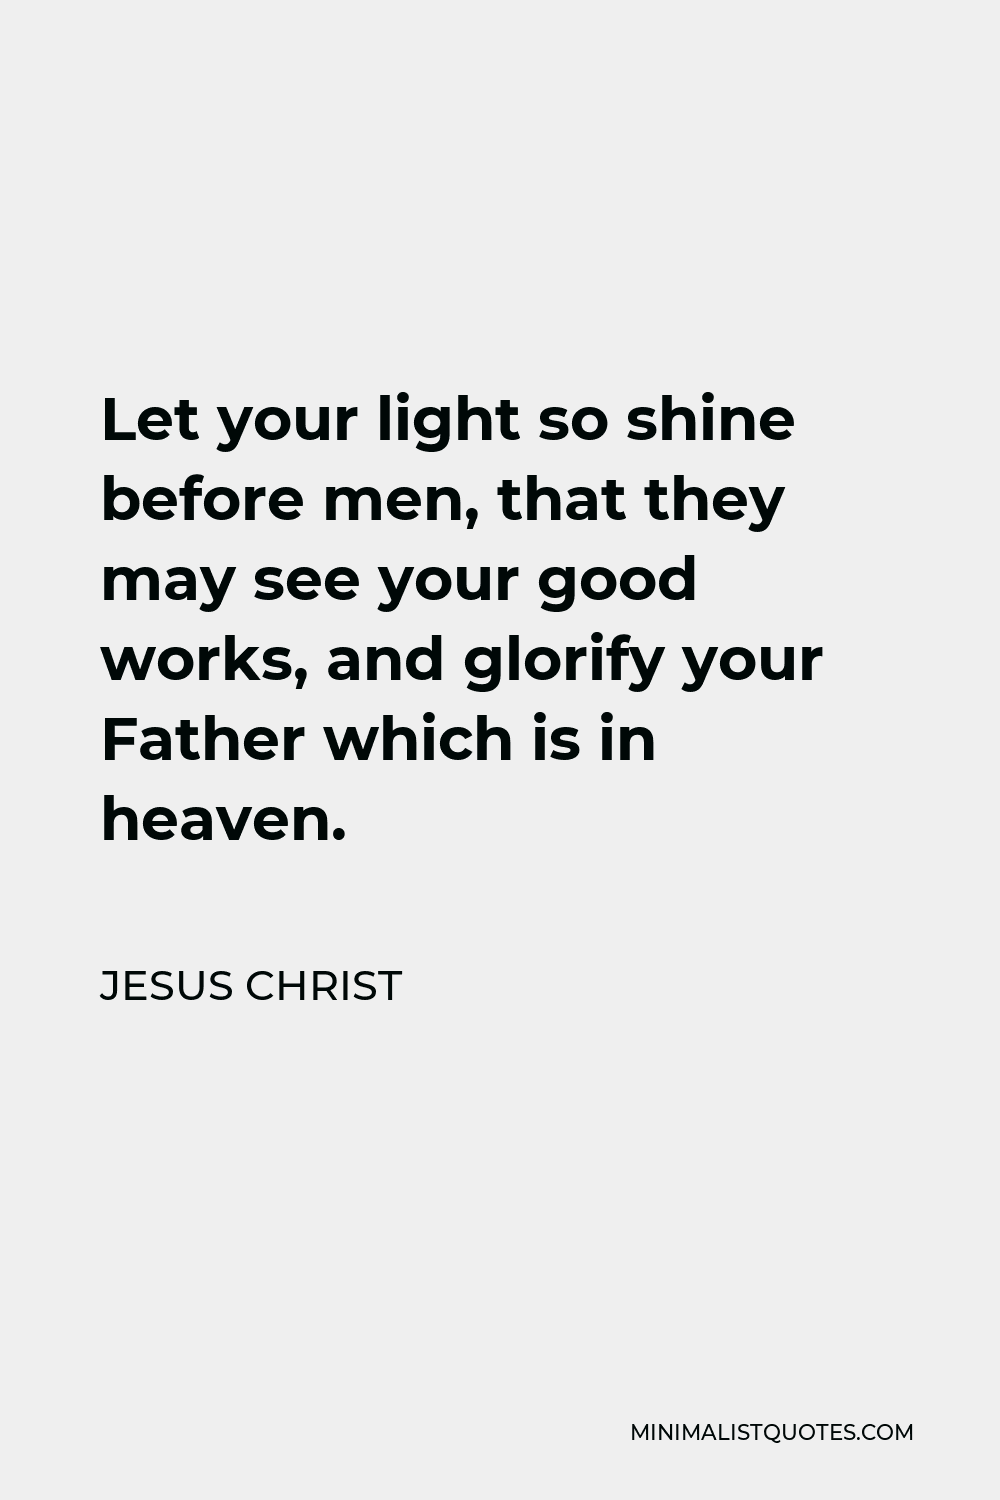 Jesus Christ Quote - Let your light so shine before men, that they may see your good works, and glorify your Father which is in heaven.